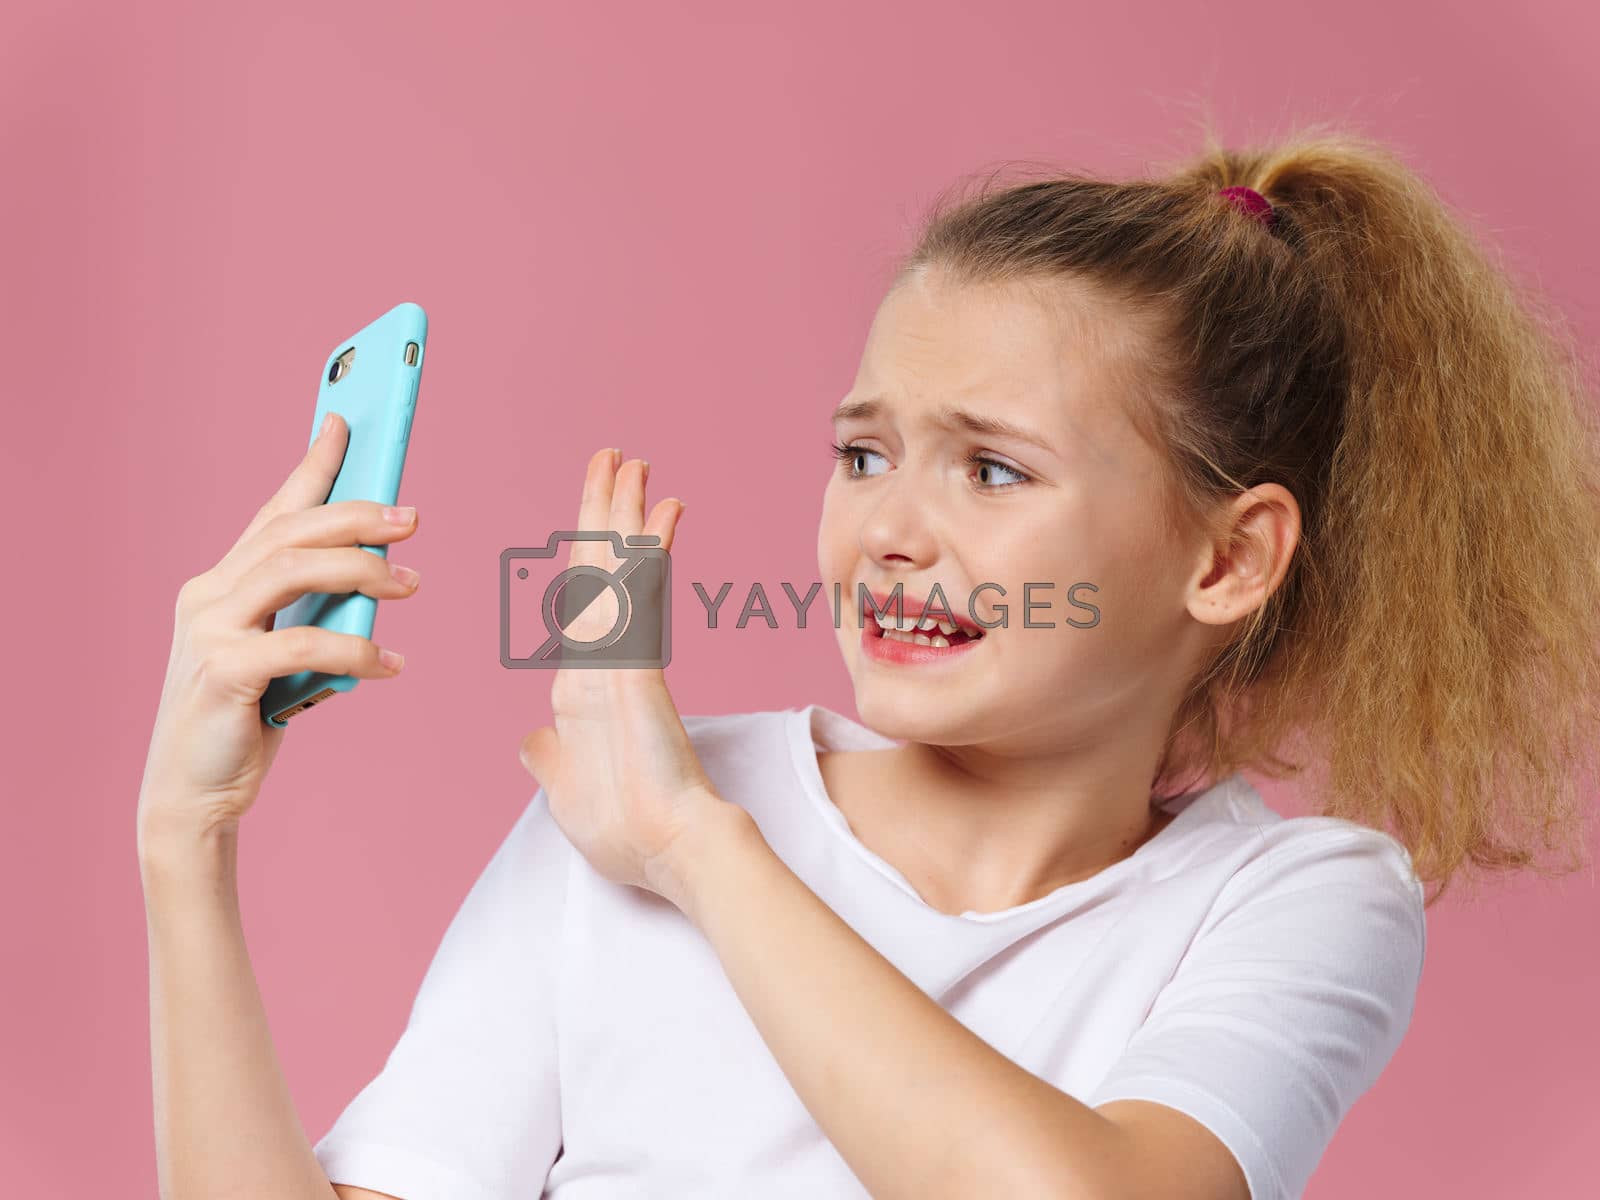 Girl with phone in hands technology communication emotions pink background dissatisfaction